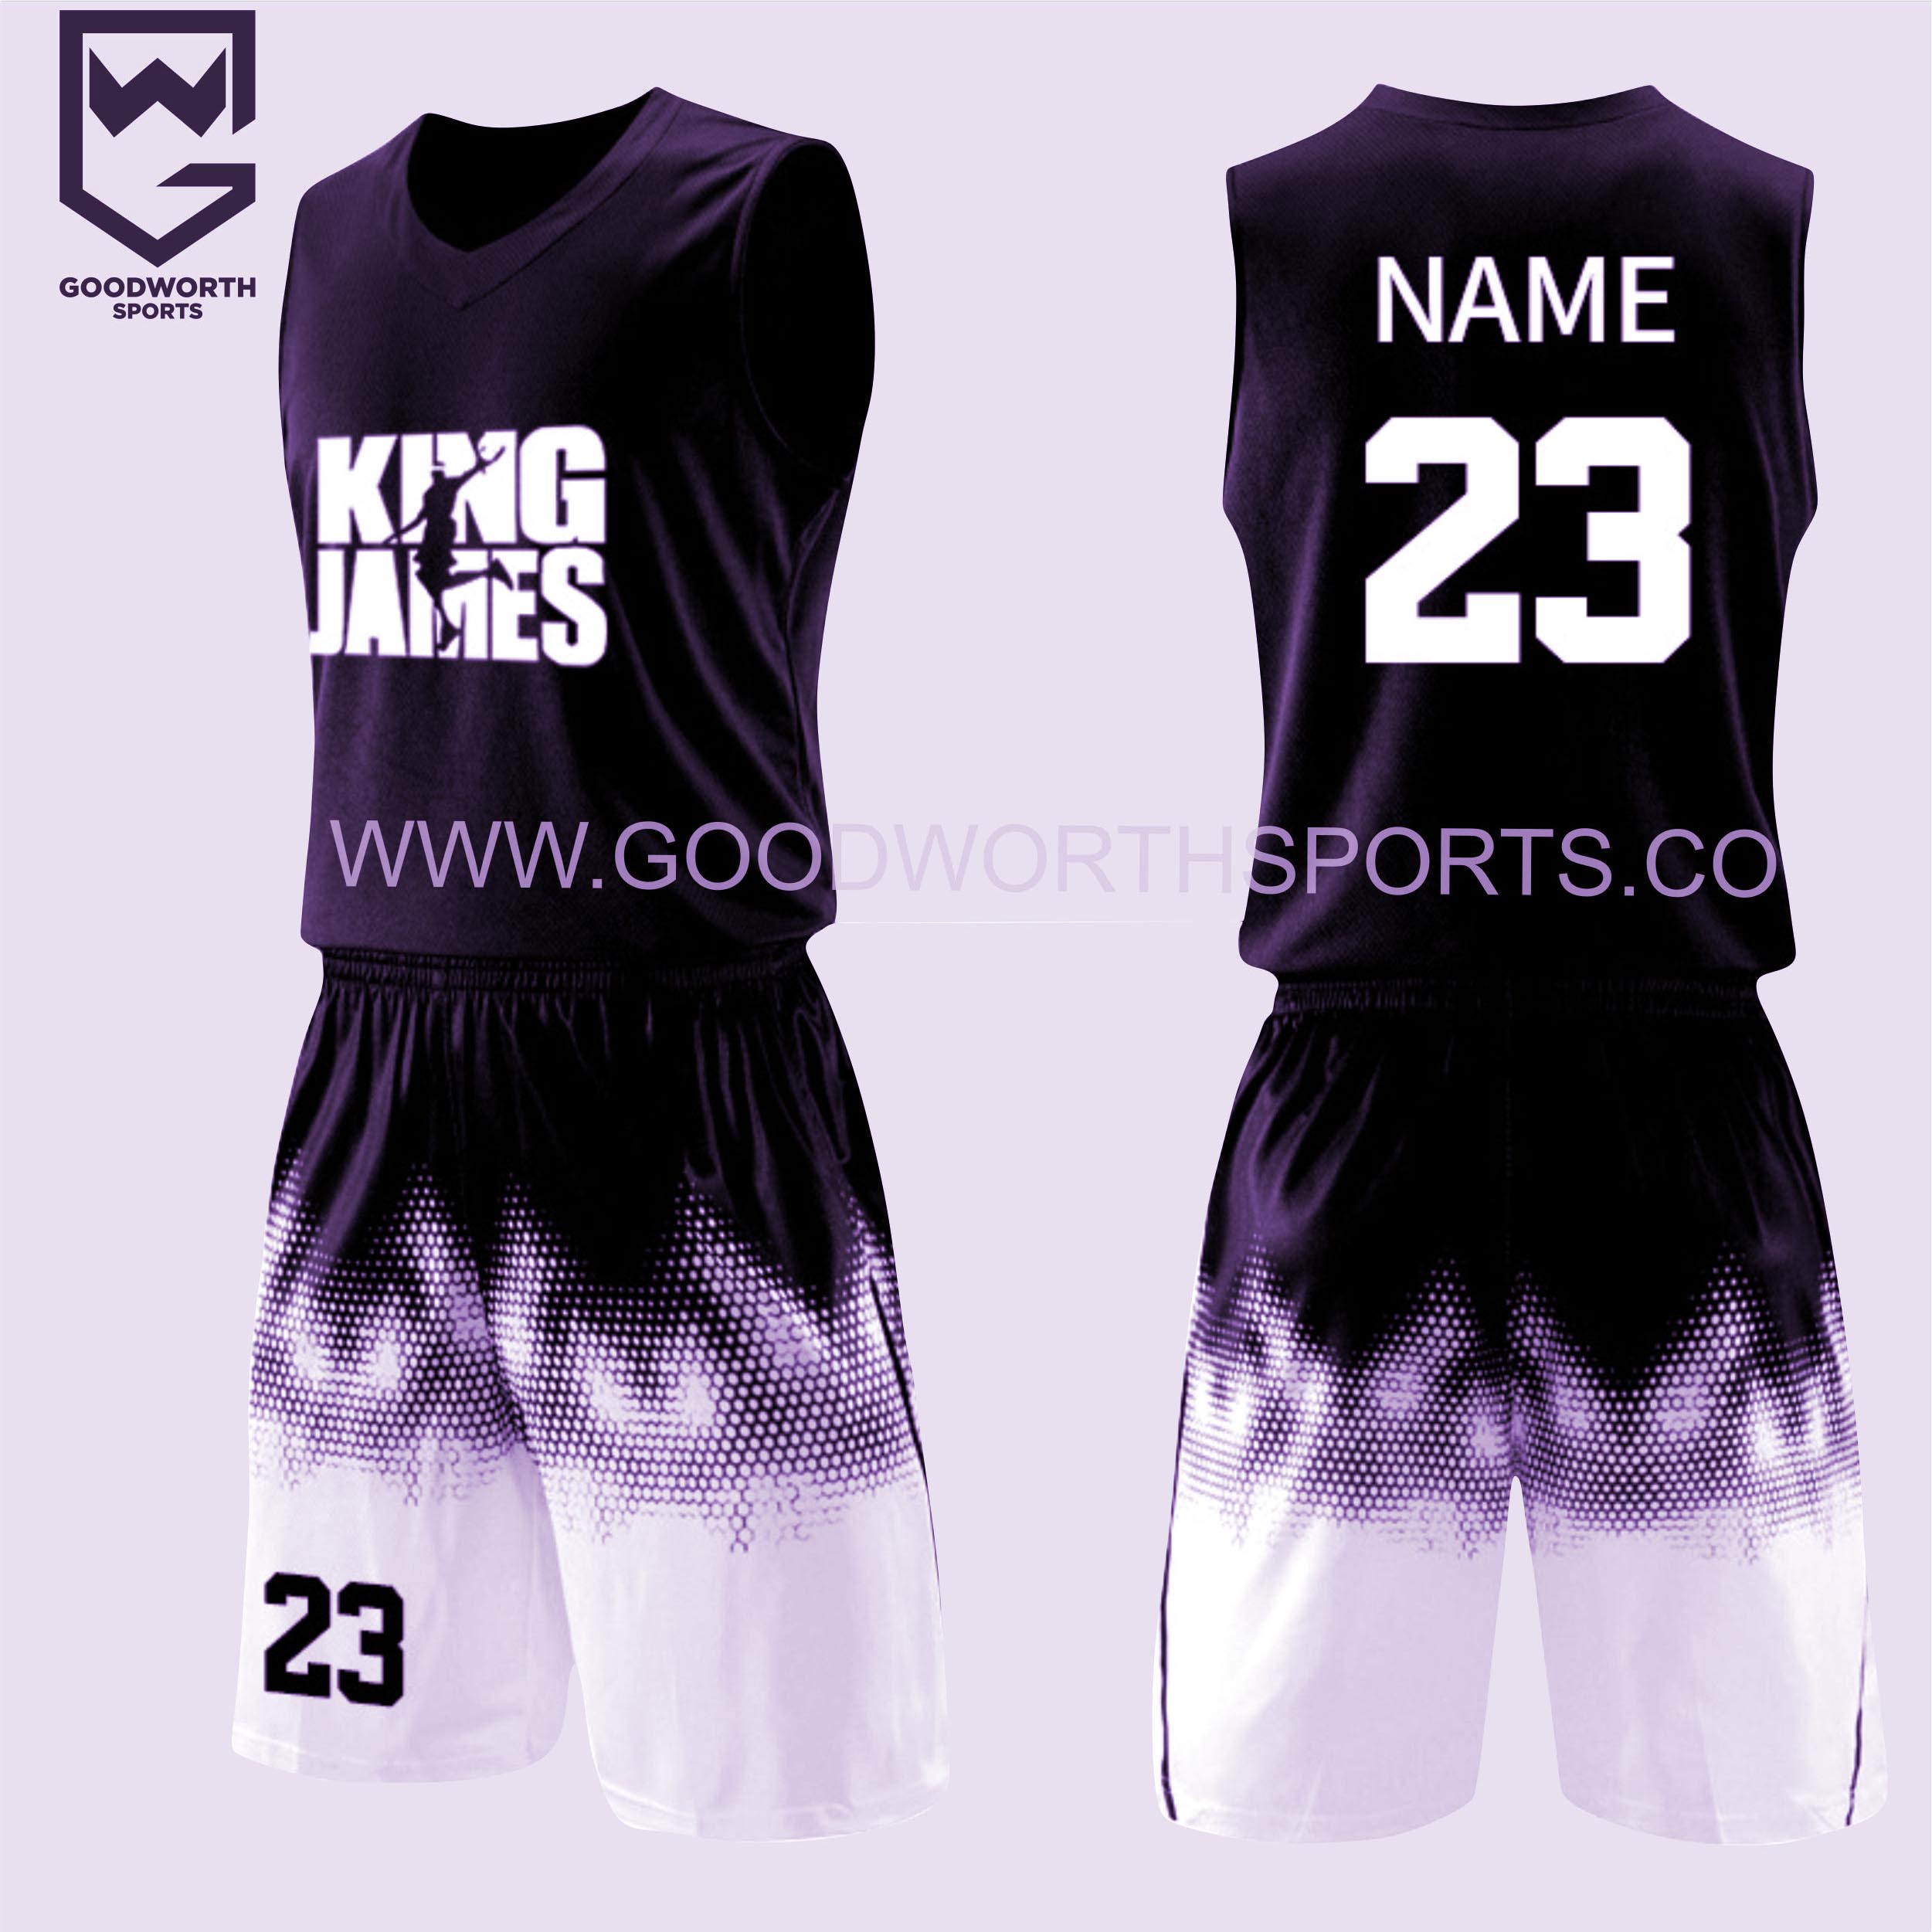 sublimation layout philippines basketball jersey design